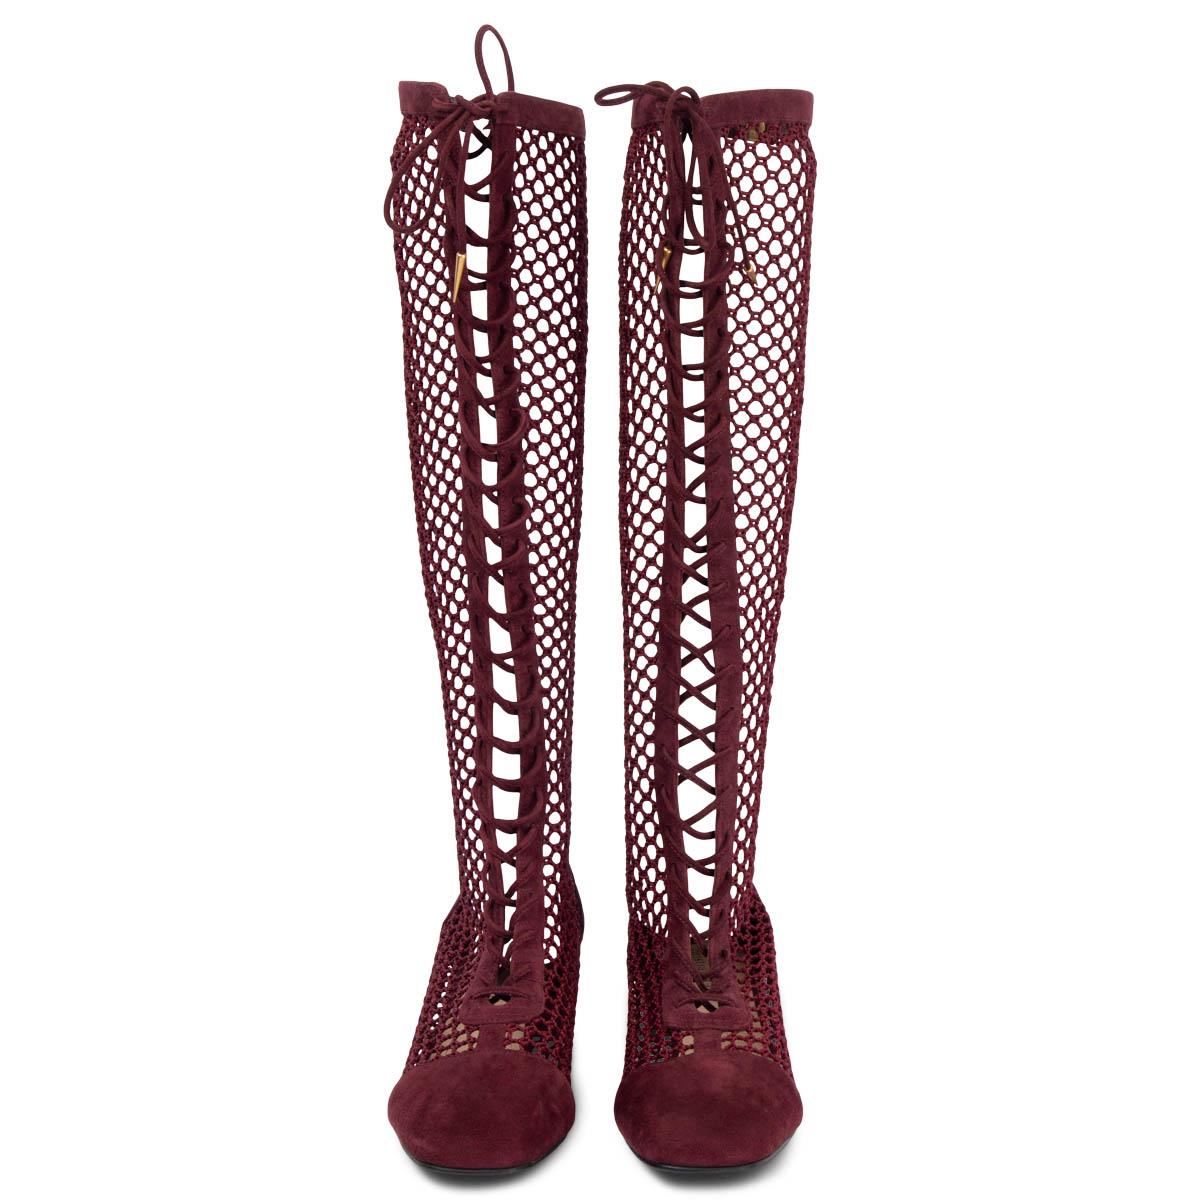 100% authentic Christian Dior Naughtily-D Fishnet Lace-Up Boots in burgundy suede leather and burgundy fishnet fabric. Open with a zipper on the back. Brand new. Come with dust bag. Rubber sole has been added.

2018